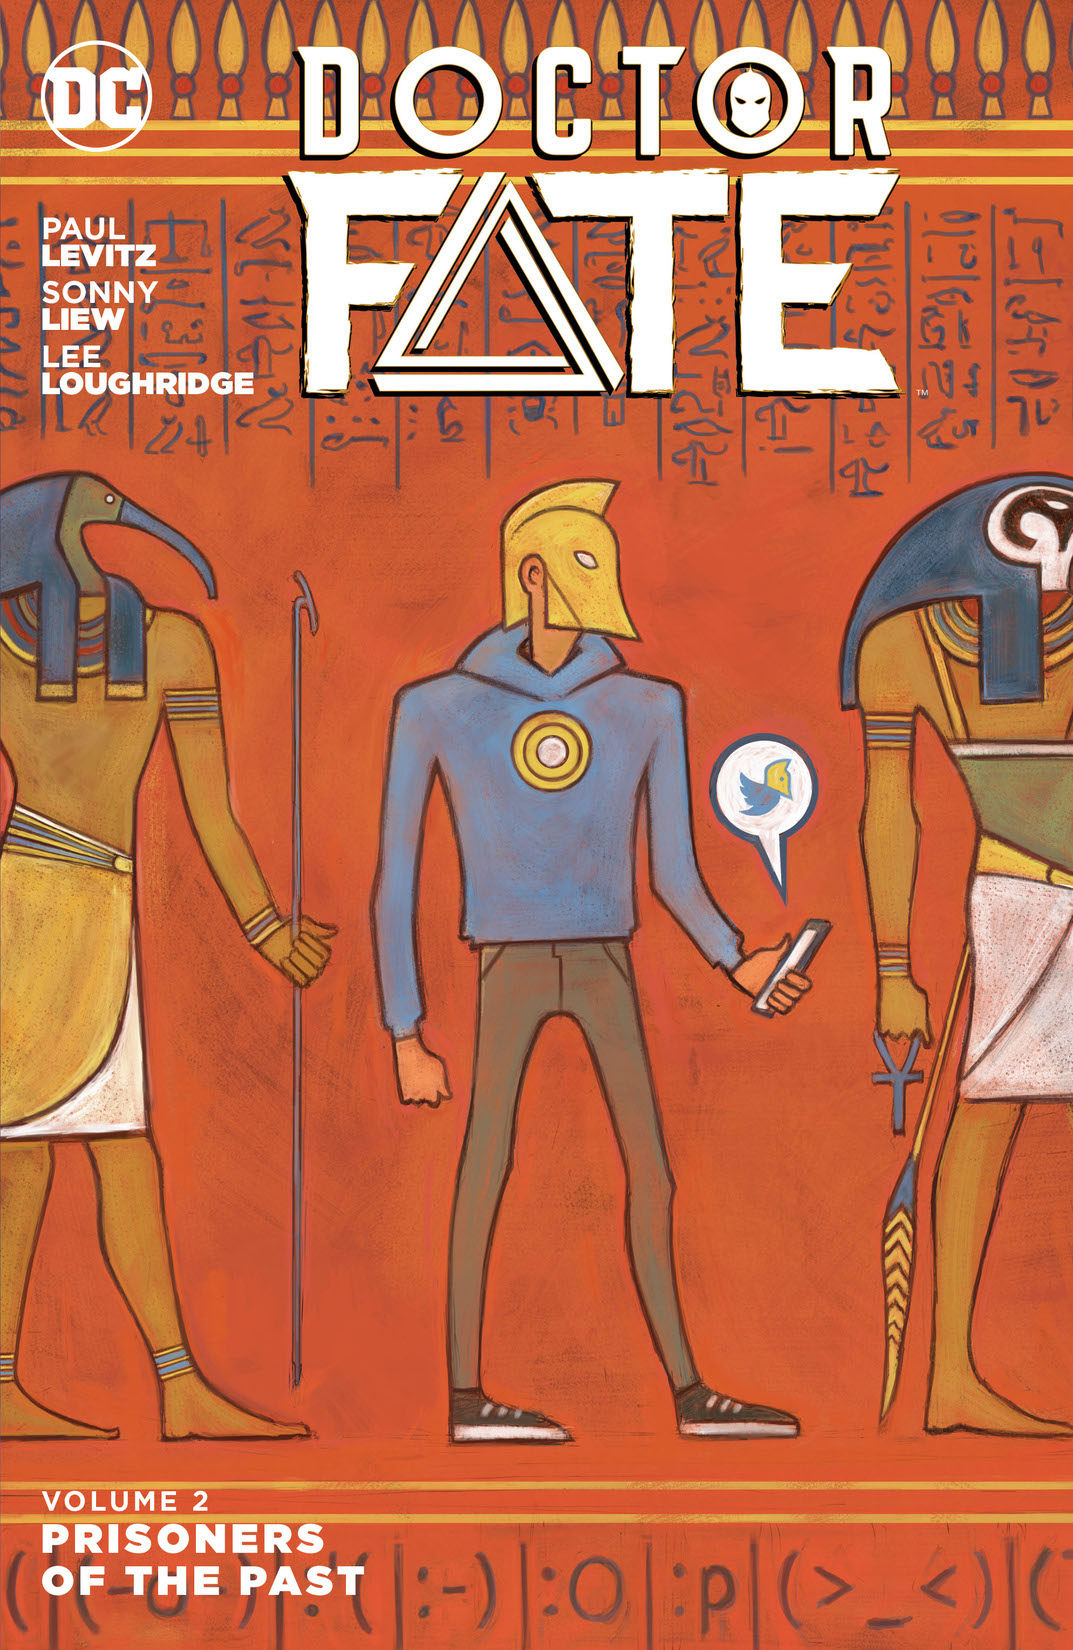 Doctor Fate Vol. 2: Prisoners of the Past preview images